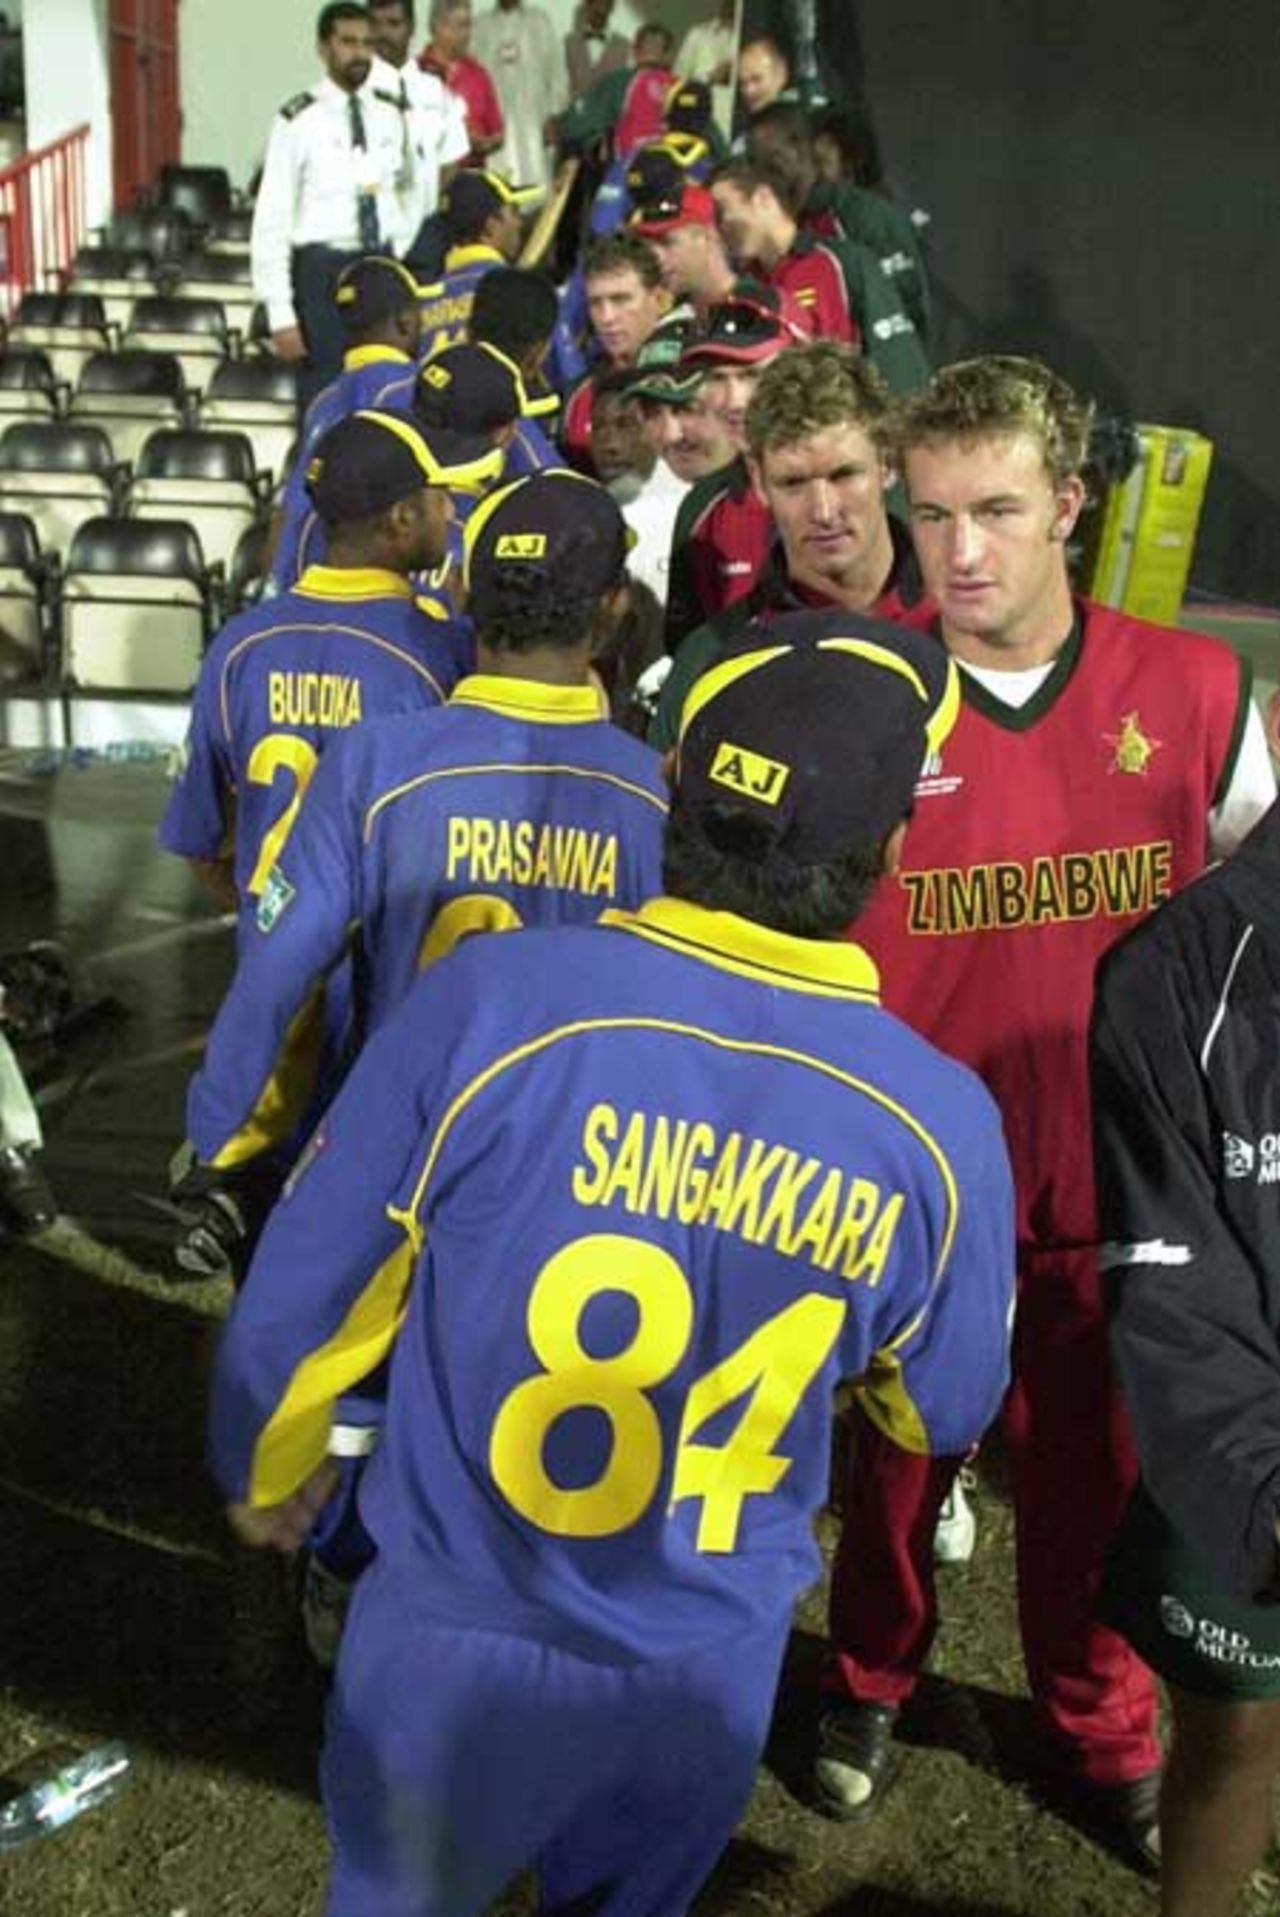 Zimbabwe team members (R) shake hands with the outgoing Sri Lankan team winning the match in the Four Nation Sharjah Cricket Tournament, 07 April 2003.